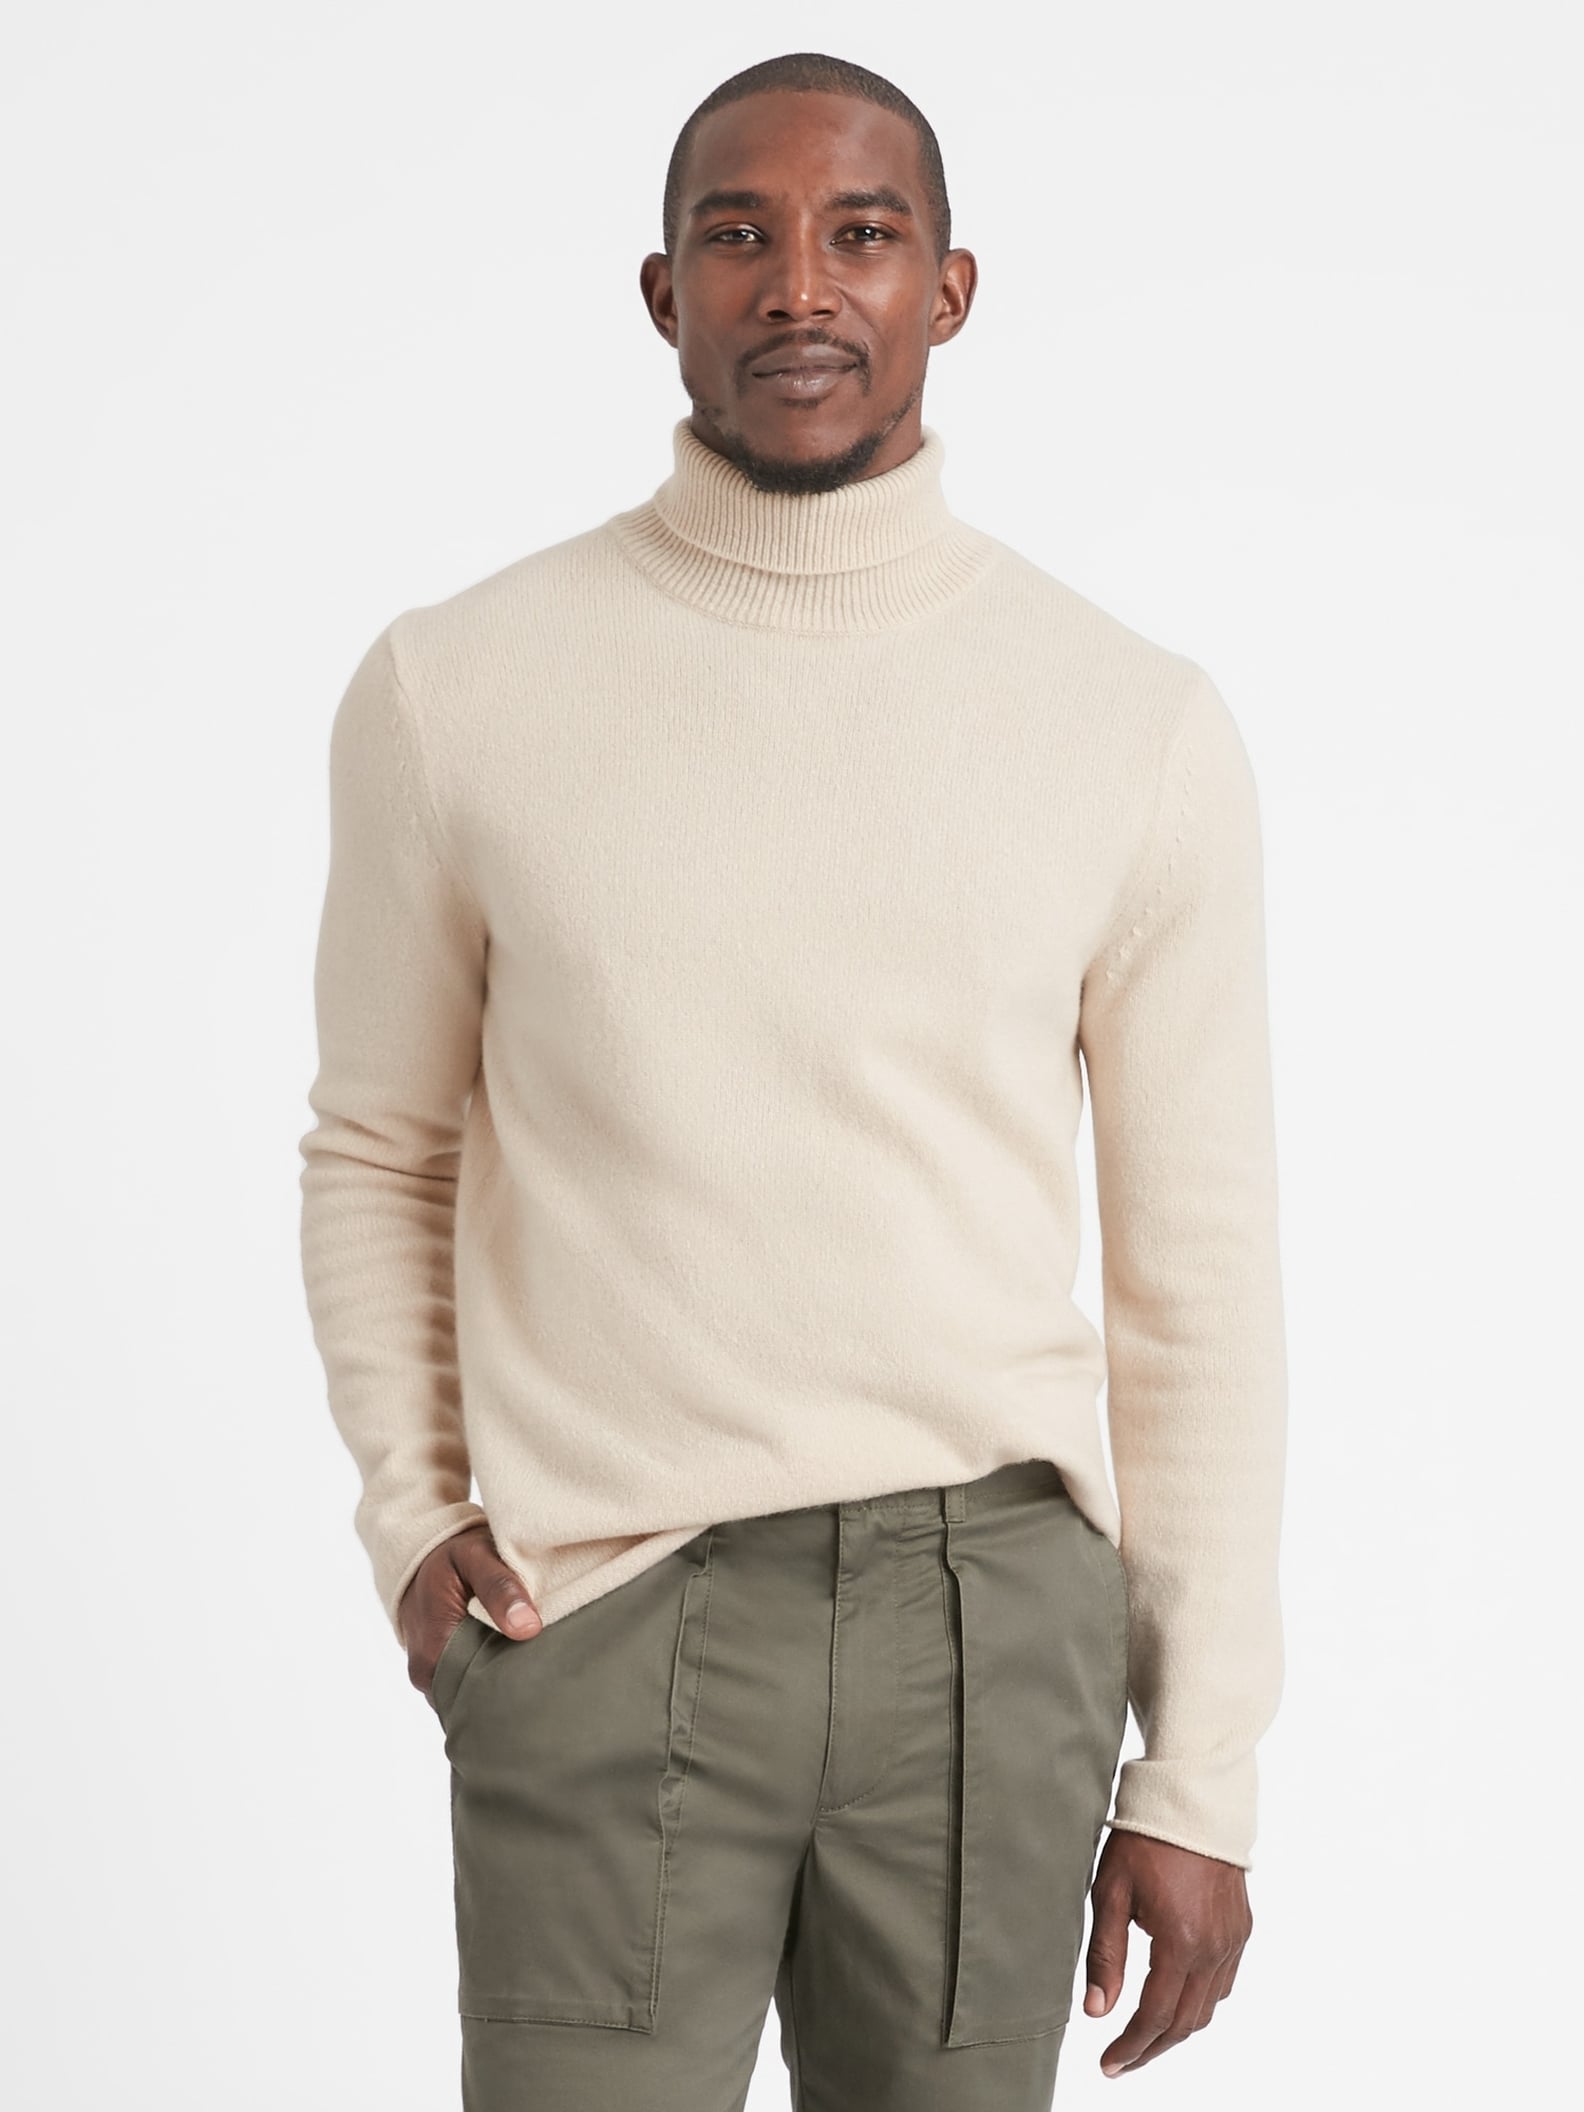 Best Cashmere Gifts From Banana Republic | POPSUGAR Fashion